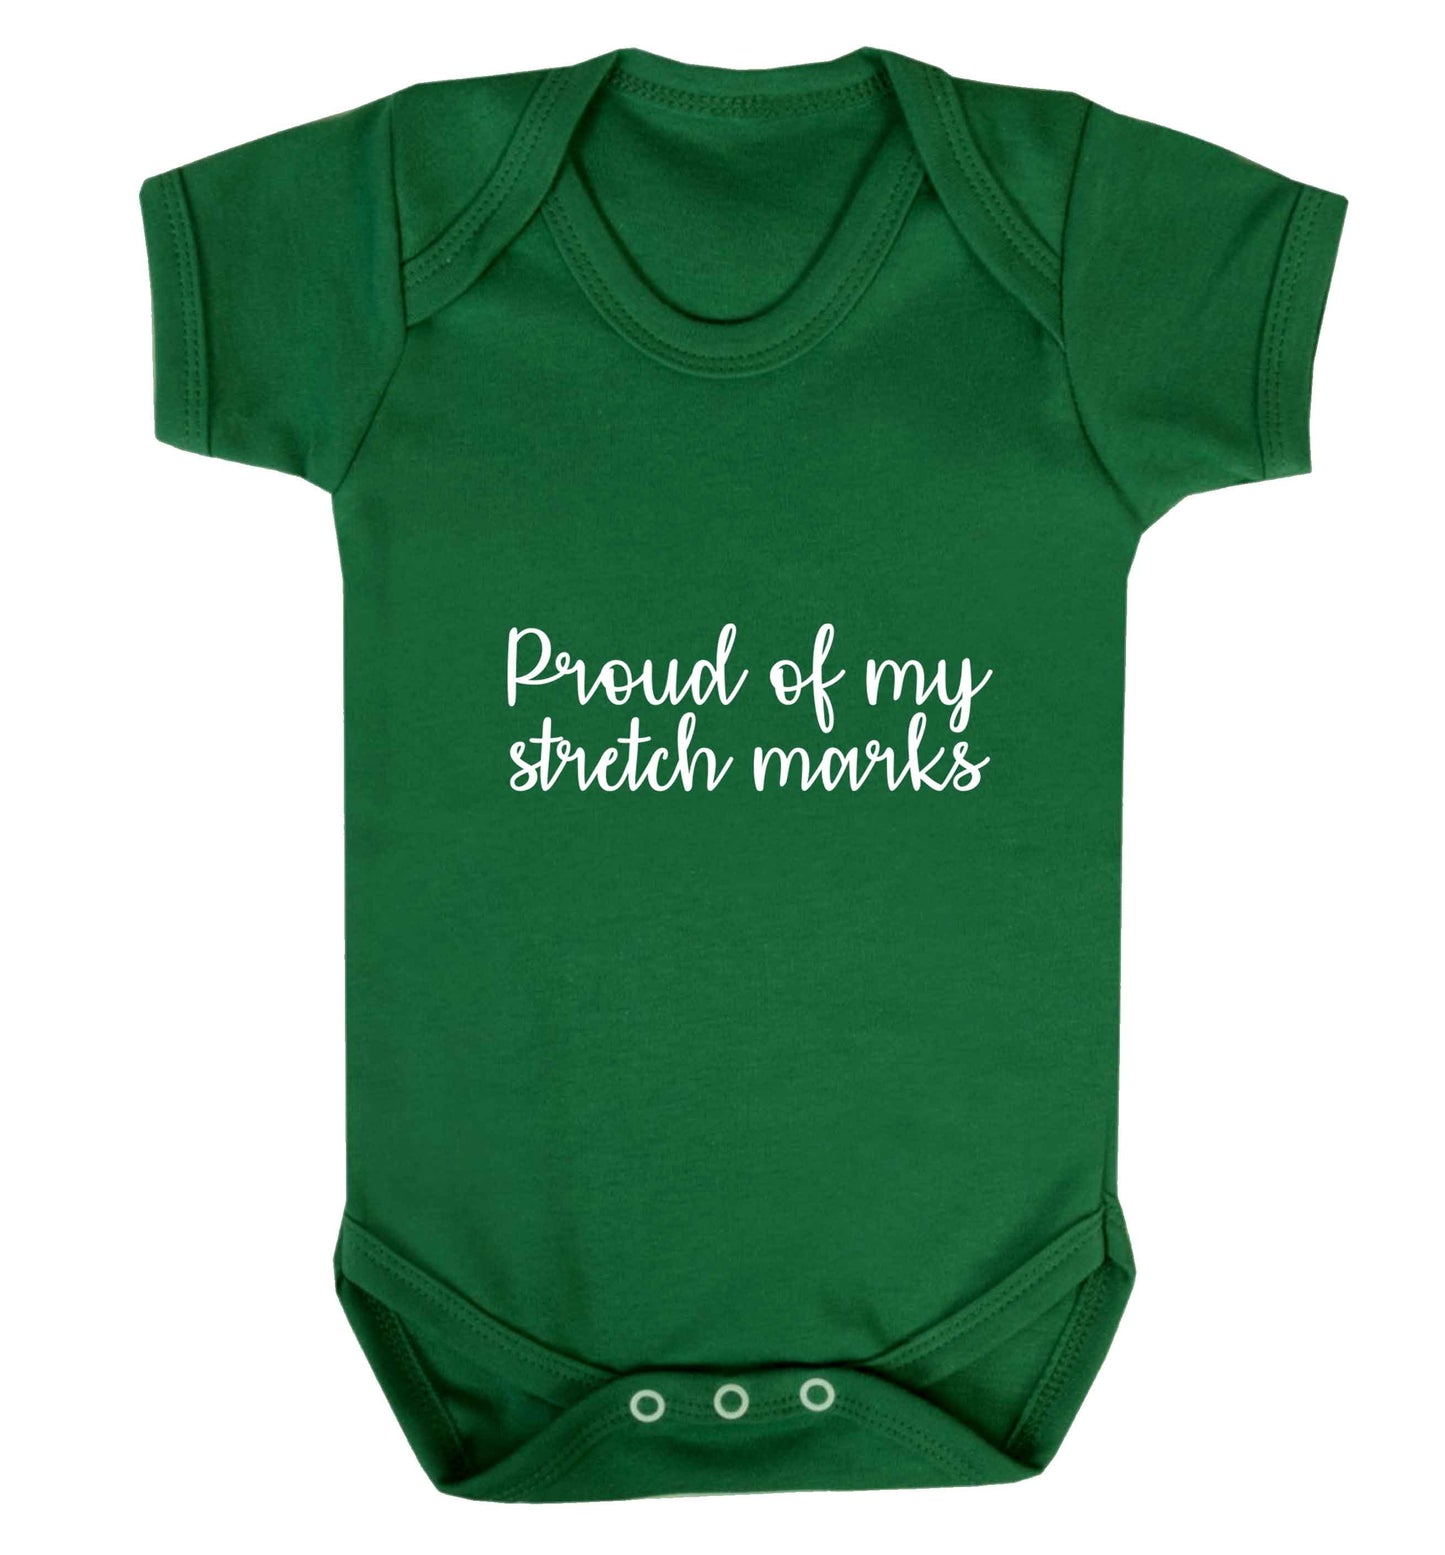 Proud of my stretch marks baby vest green 18-24 months